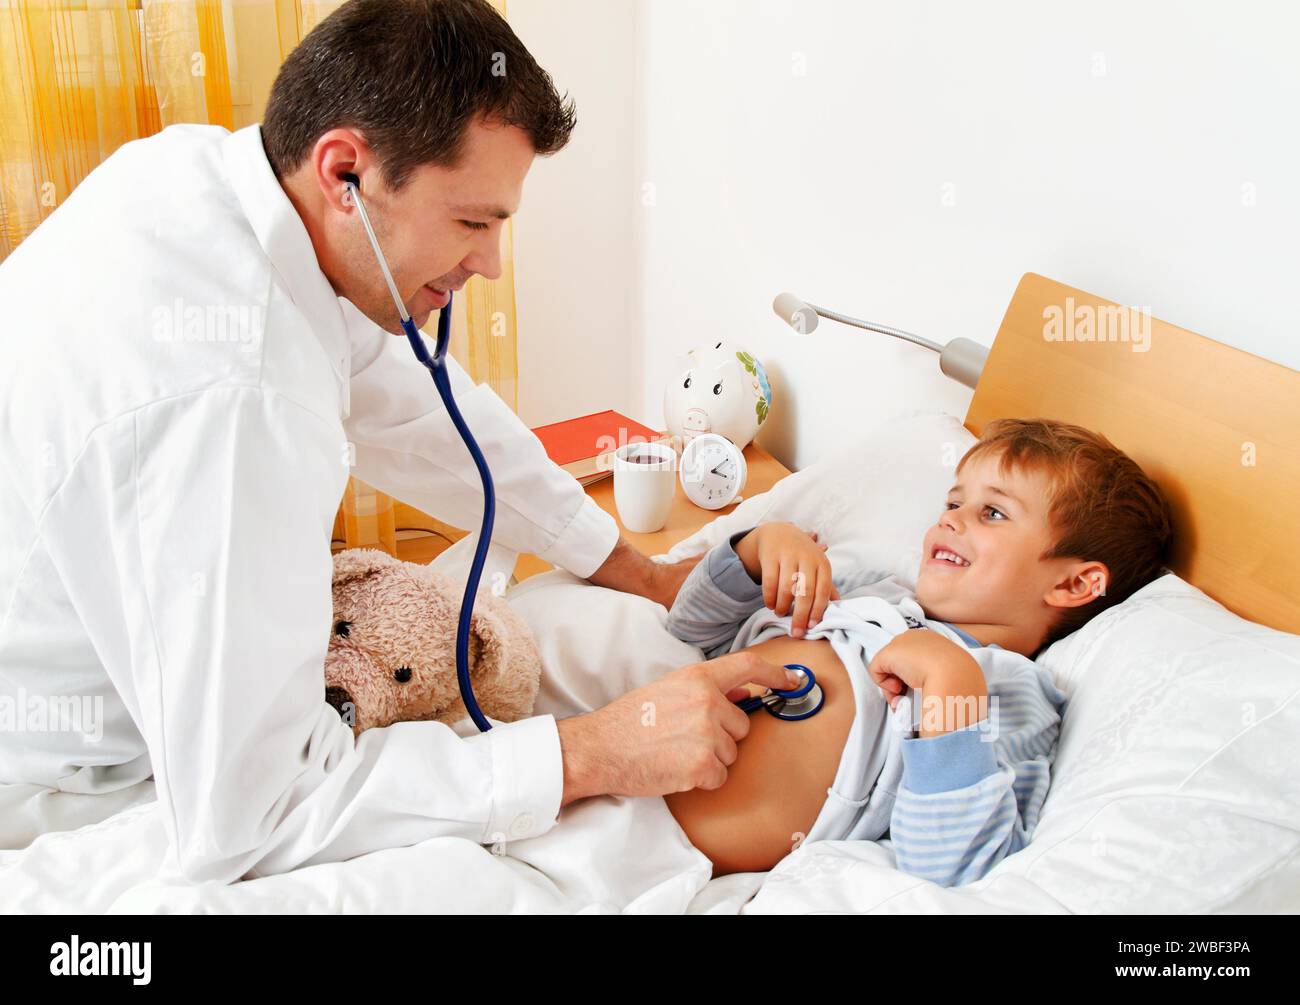 A doctor on a house call examines a sick child. Little boy lying in bed, 4-6 years old, stethoscope, examination, cold, flu Stock Photo